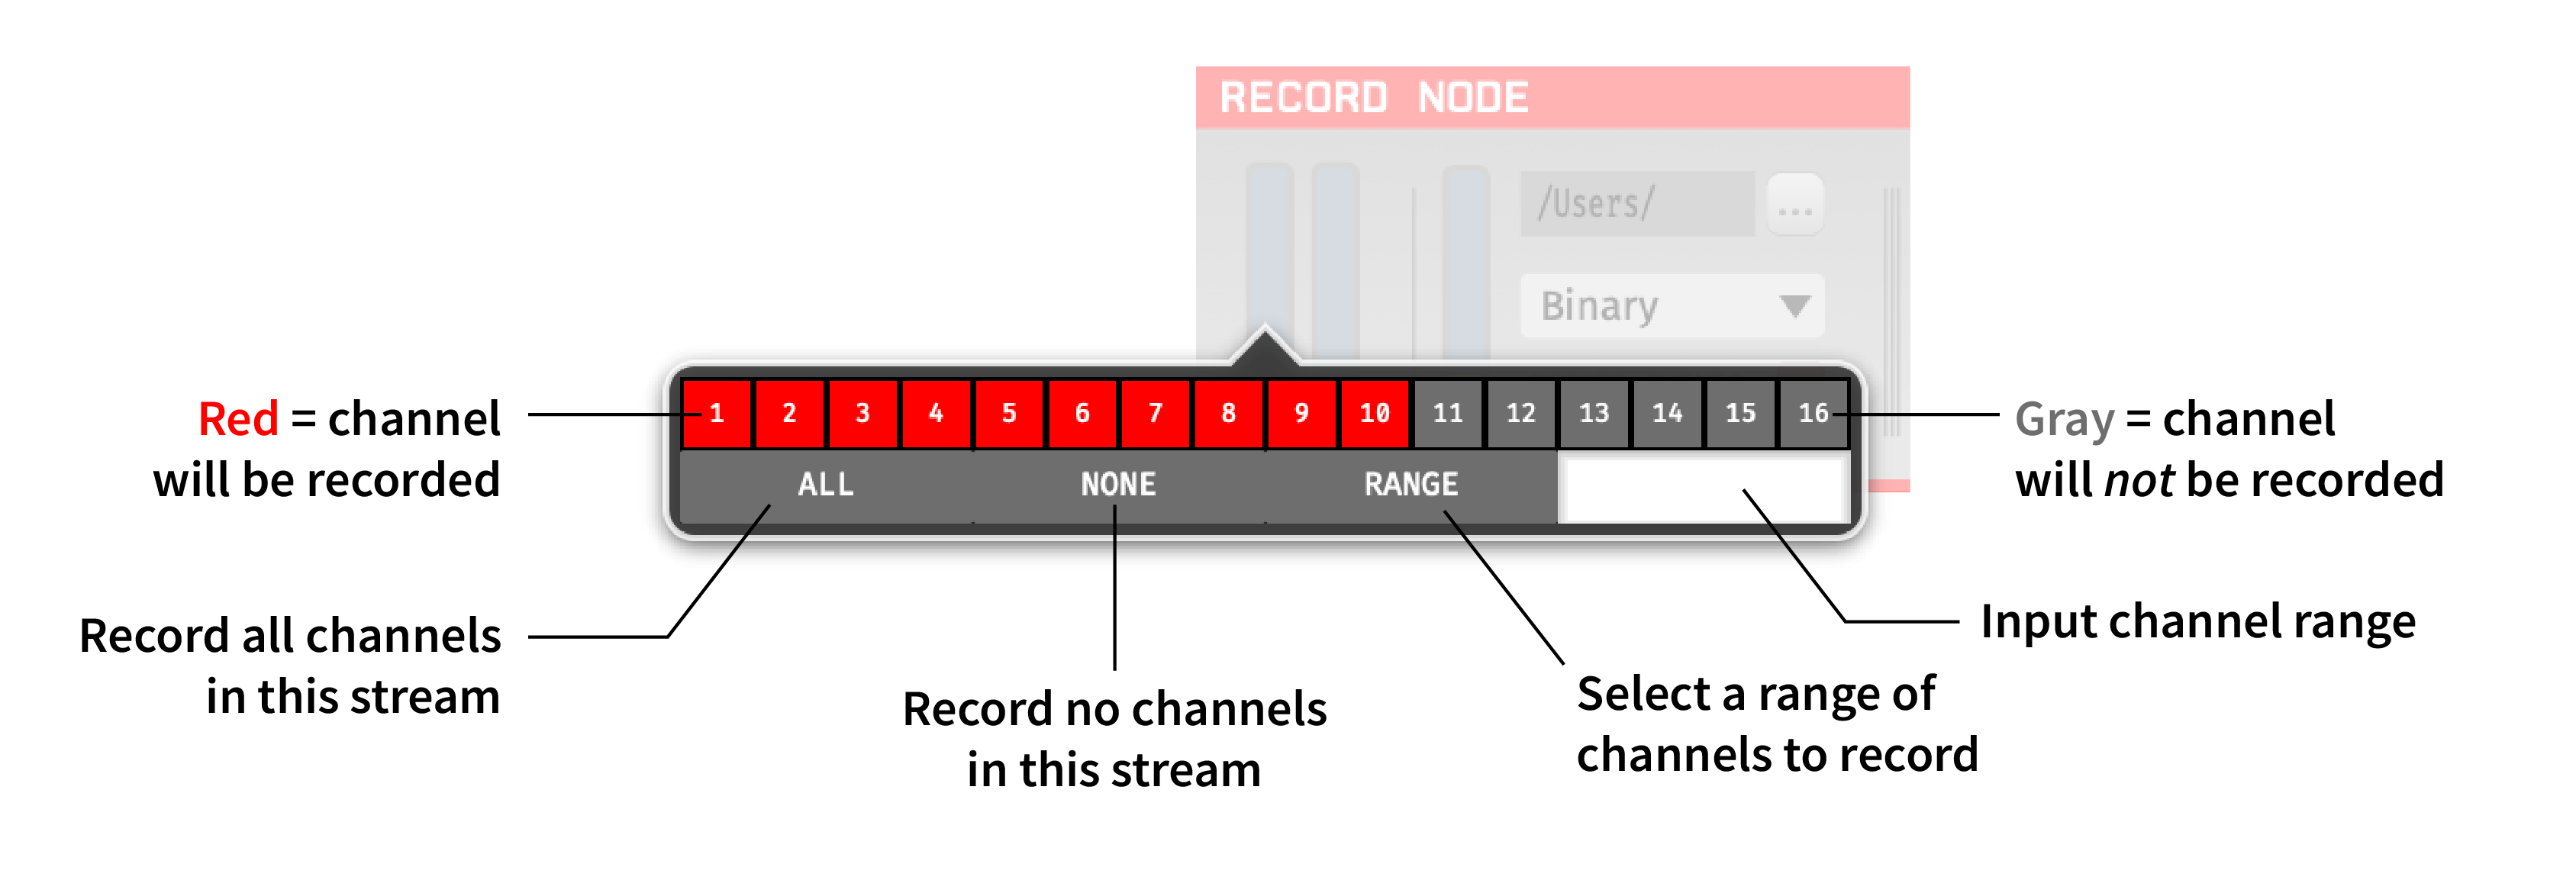 Record Node channel selection interface